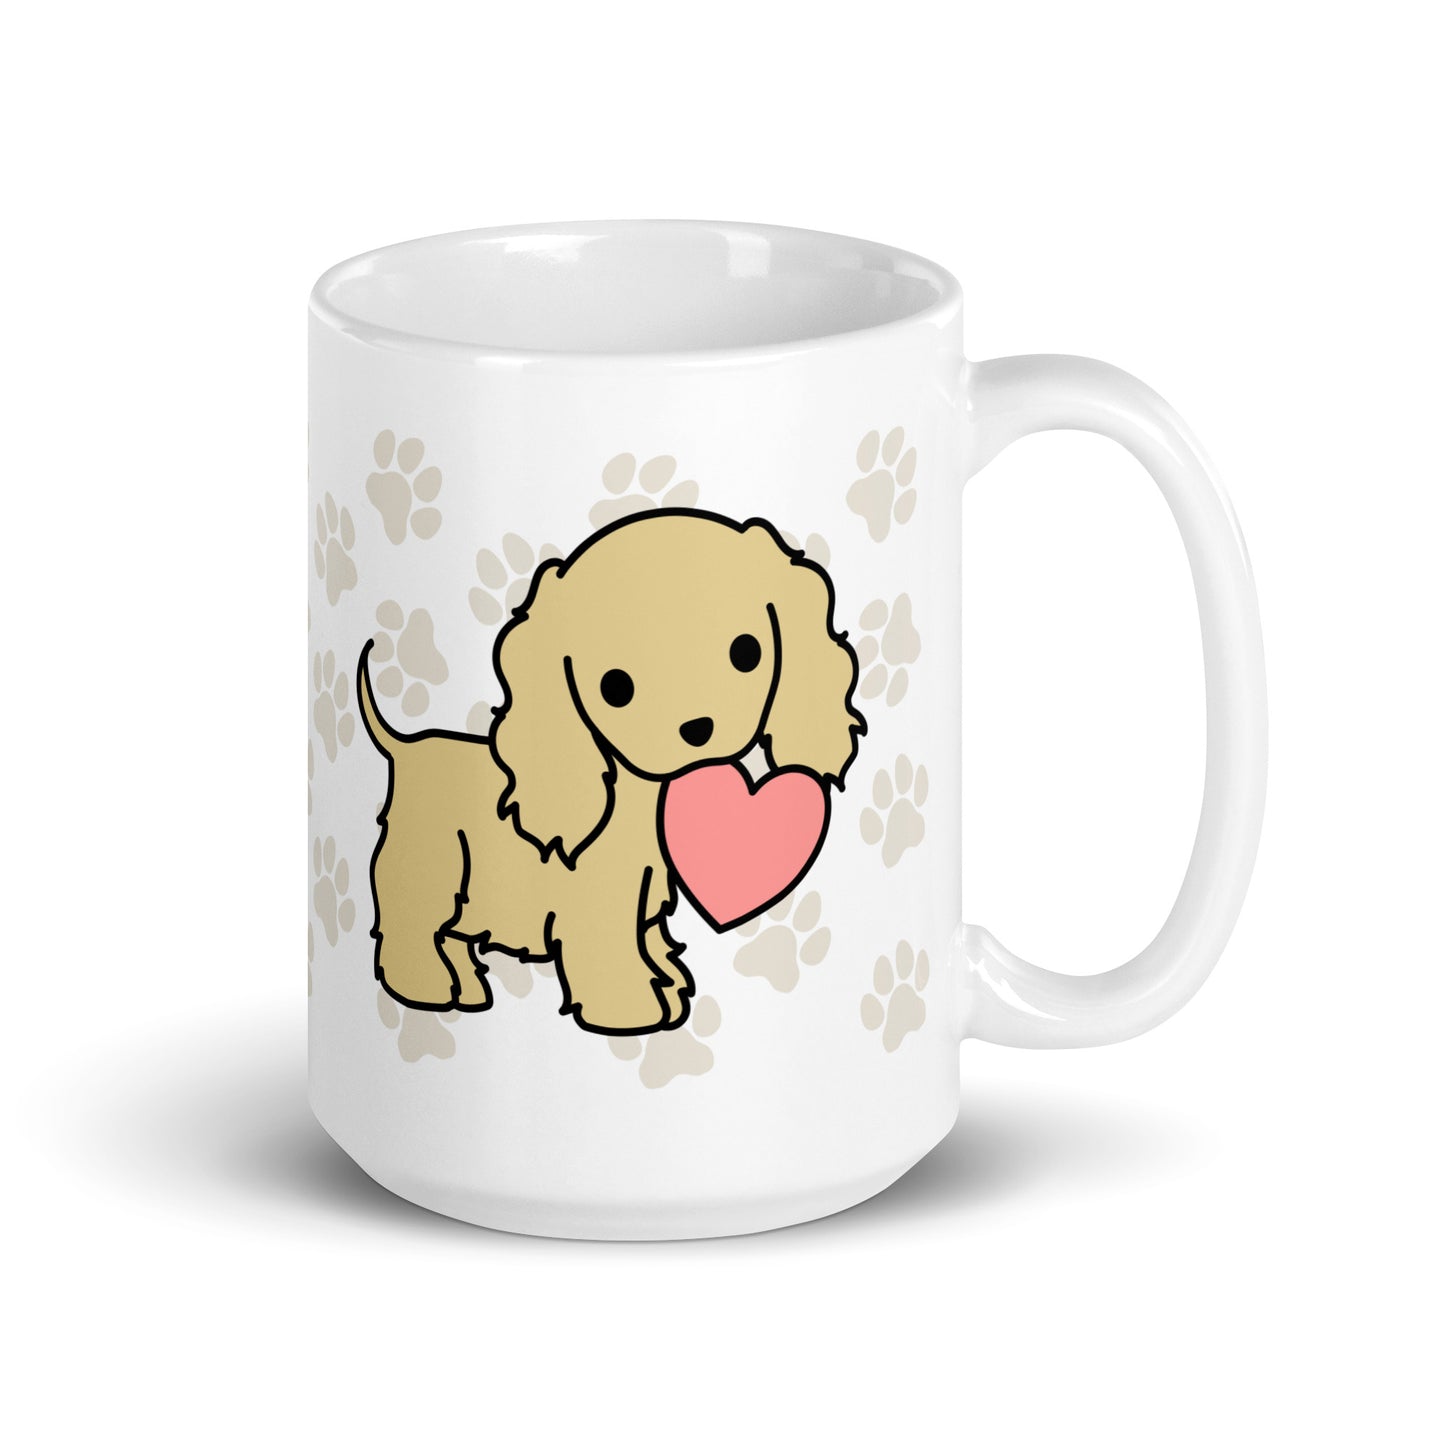 A white 15 ounce ceramic mug with a pattern of light brown pawprints all over. The mug also features a stylized illustration of a Cocker Spaniel holding a heart in its mouth.